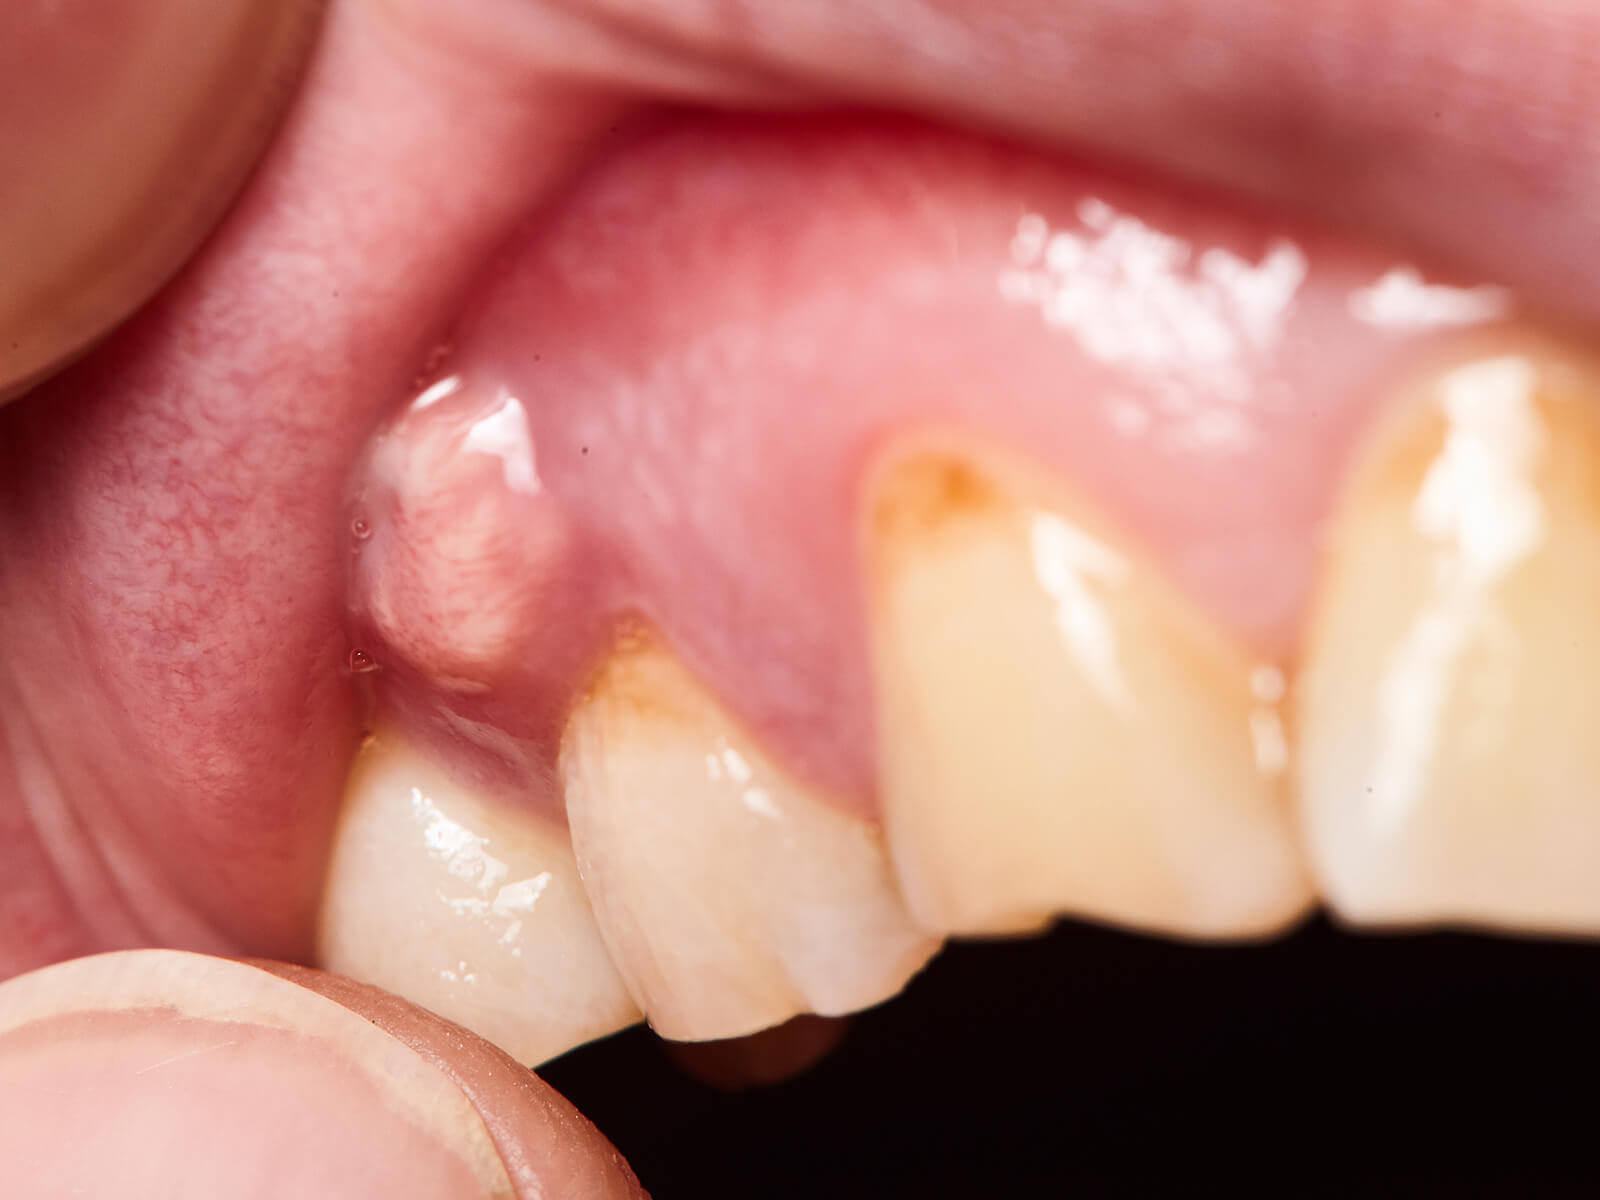 When A Tooth Abscess Is a Dental Emergency